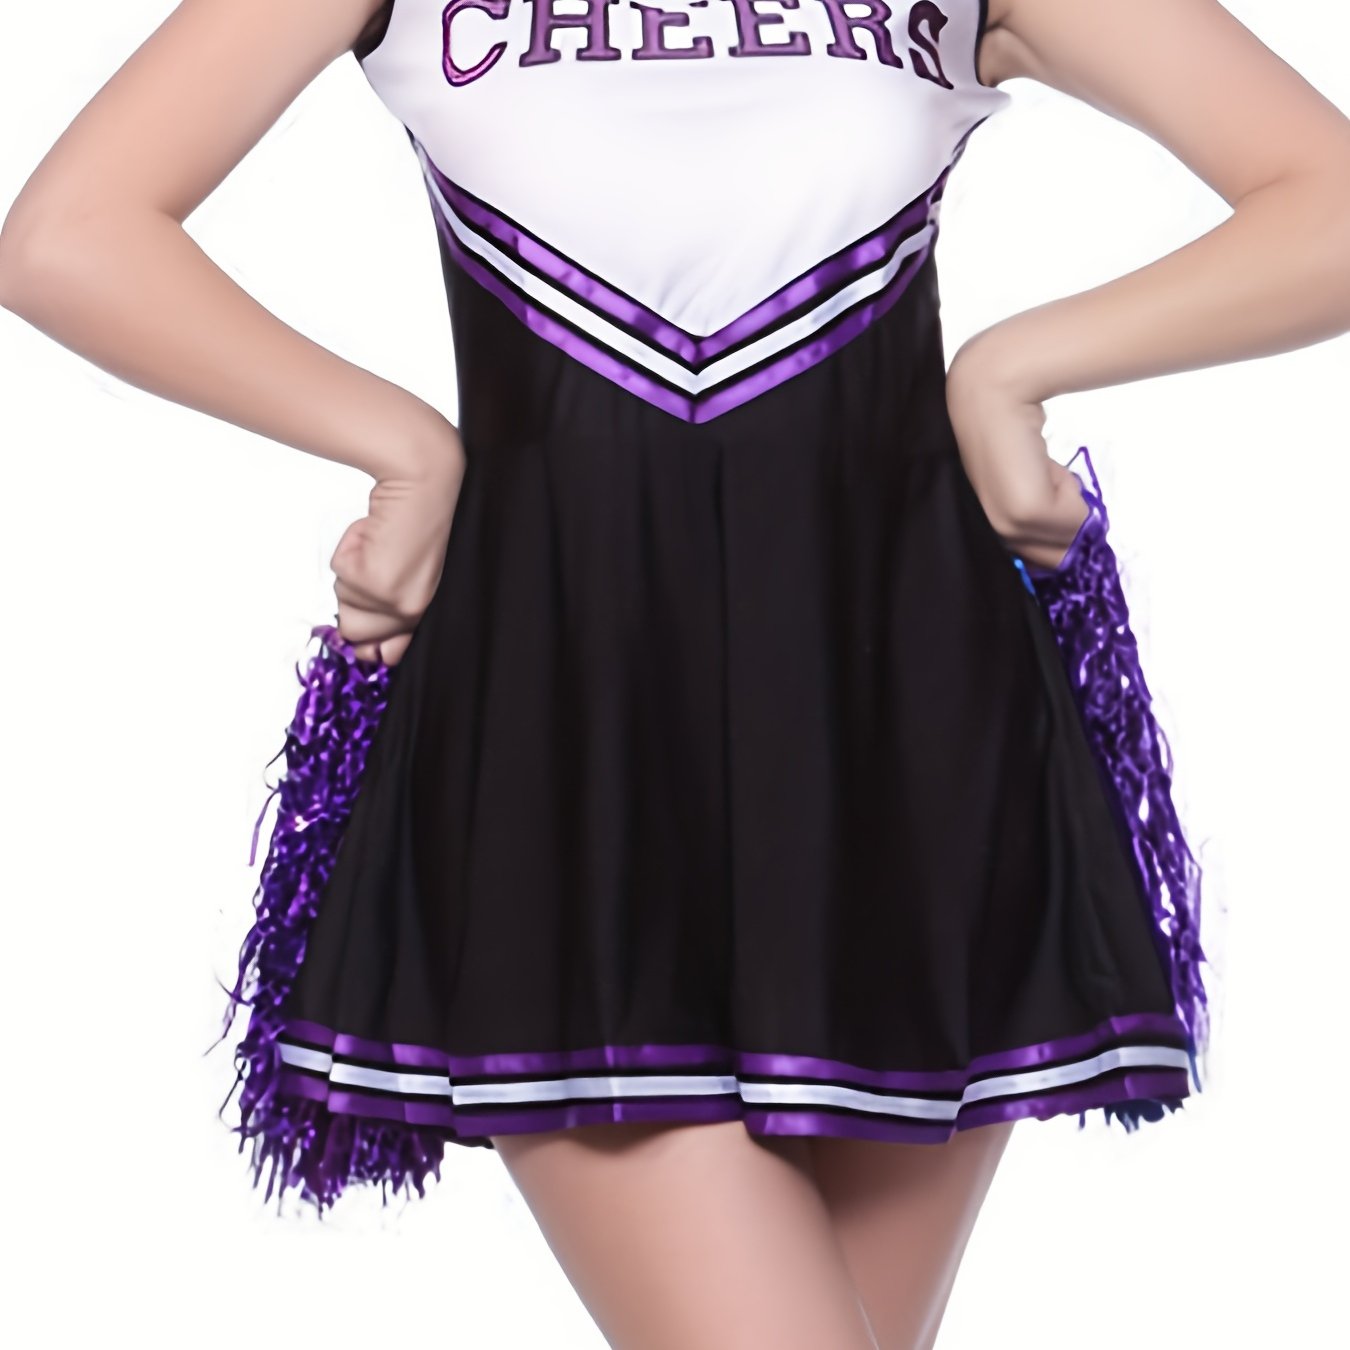 Ladies Cheerleader Costume High School Girls Cheer Outfit Set For Women  Carnival Party Cosplay Dress Up Cheerleading Uniform Yj5-2